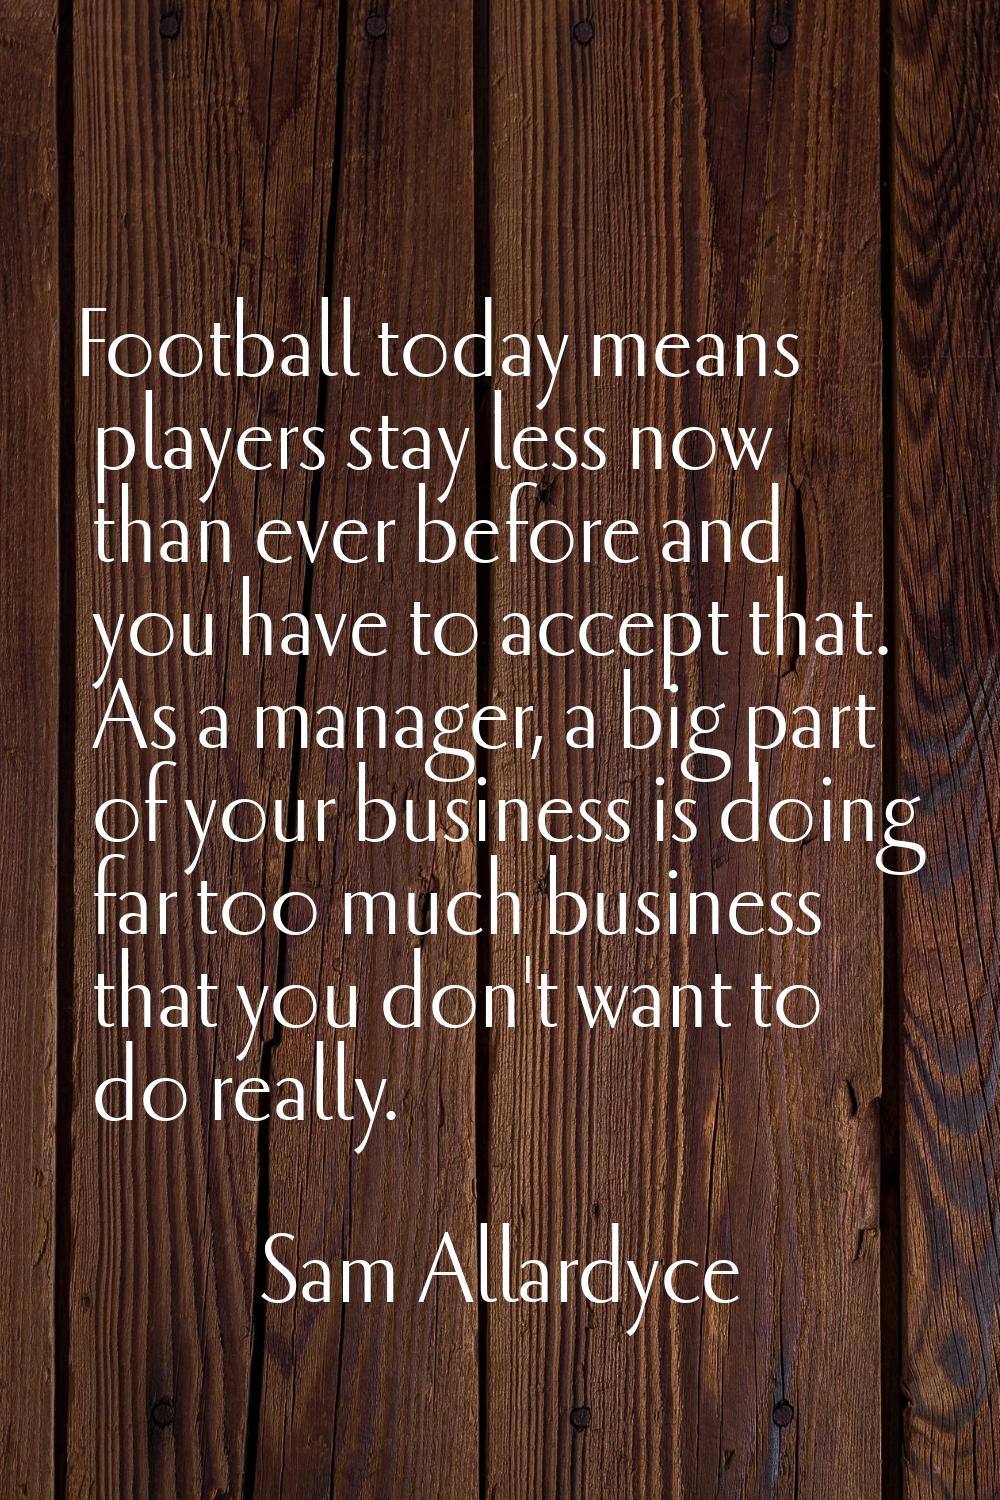 Football today means players stay less now than ever before and you have to accept that. As a manag